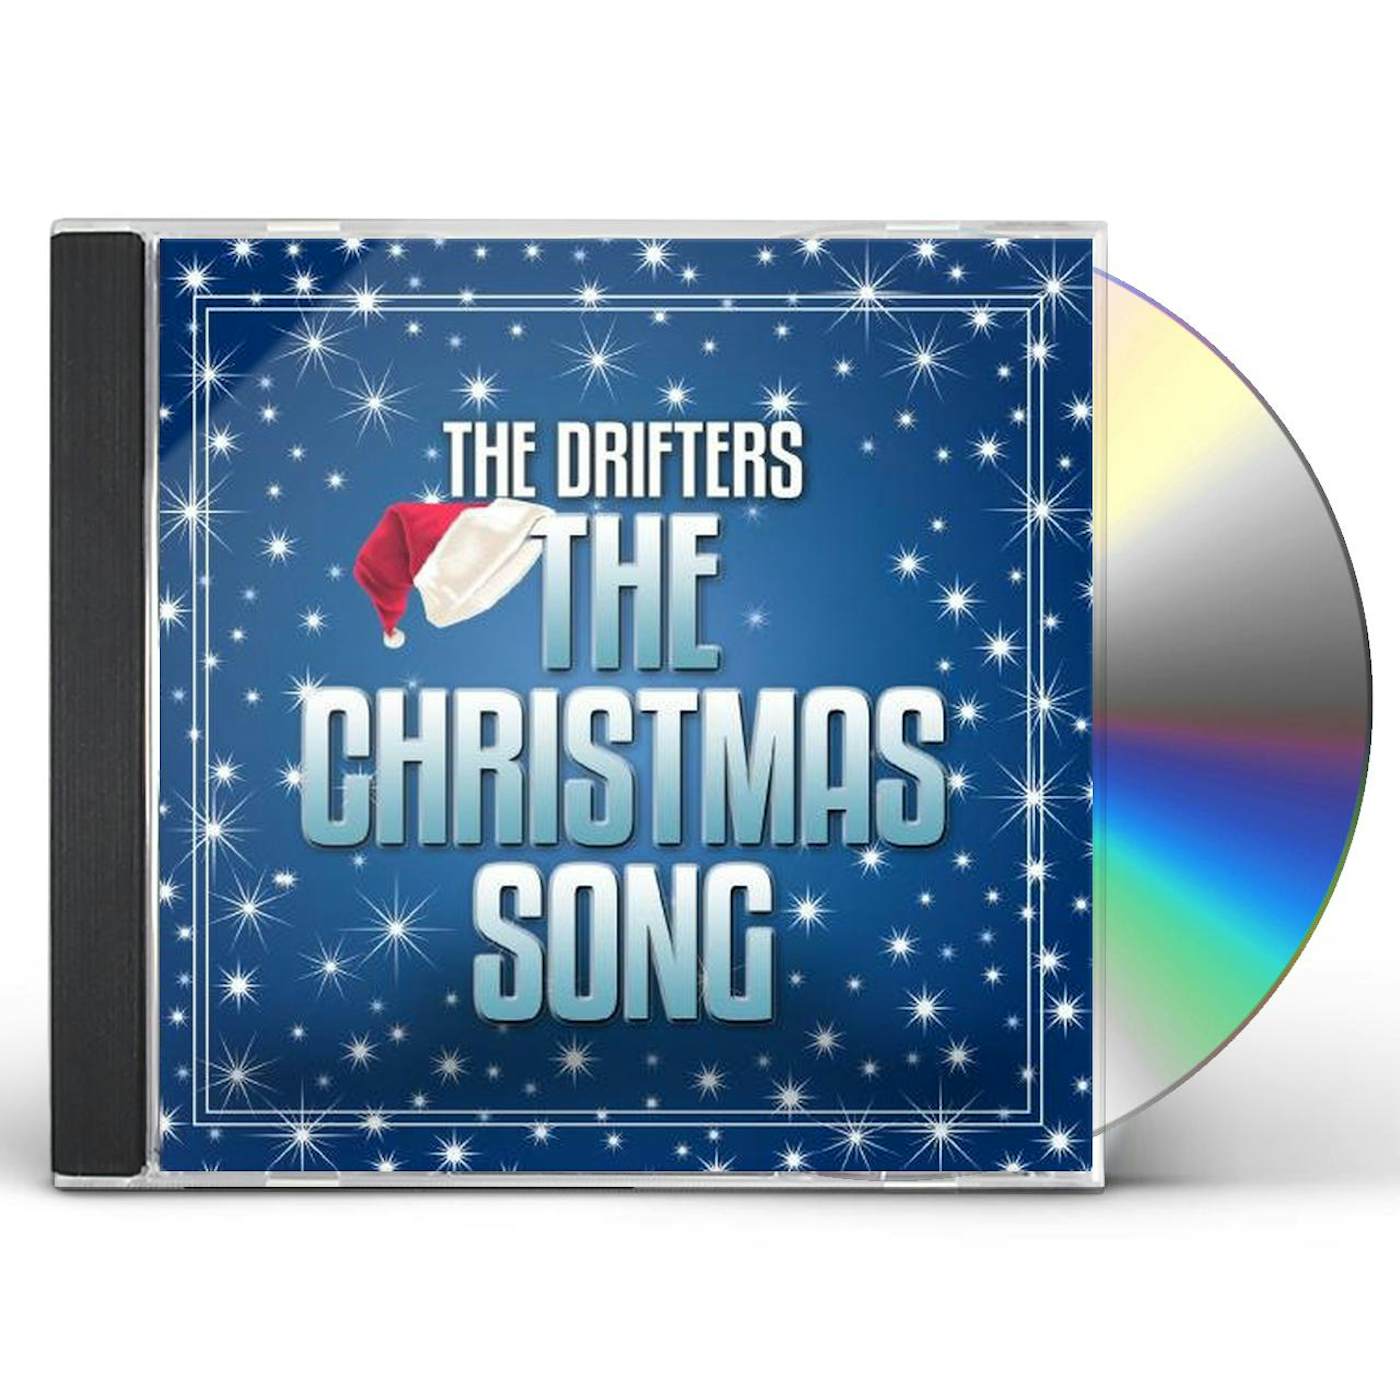 The Drifters CHRISTMAS SONG CD